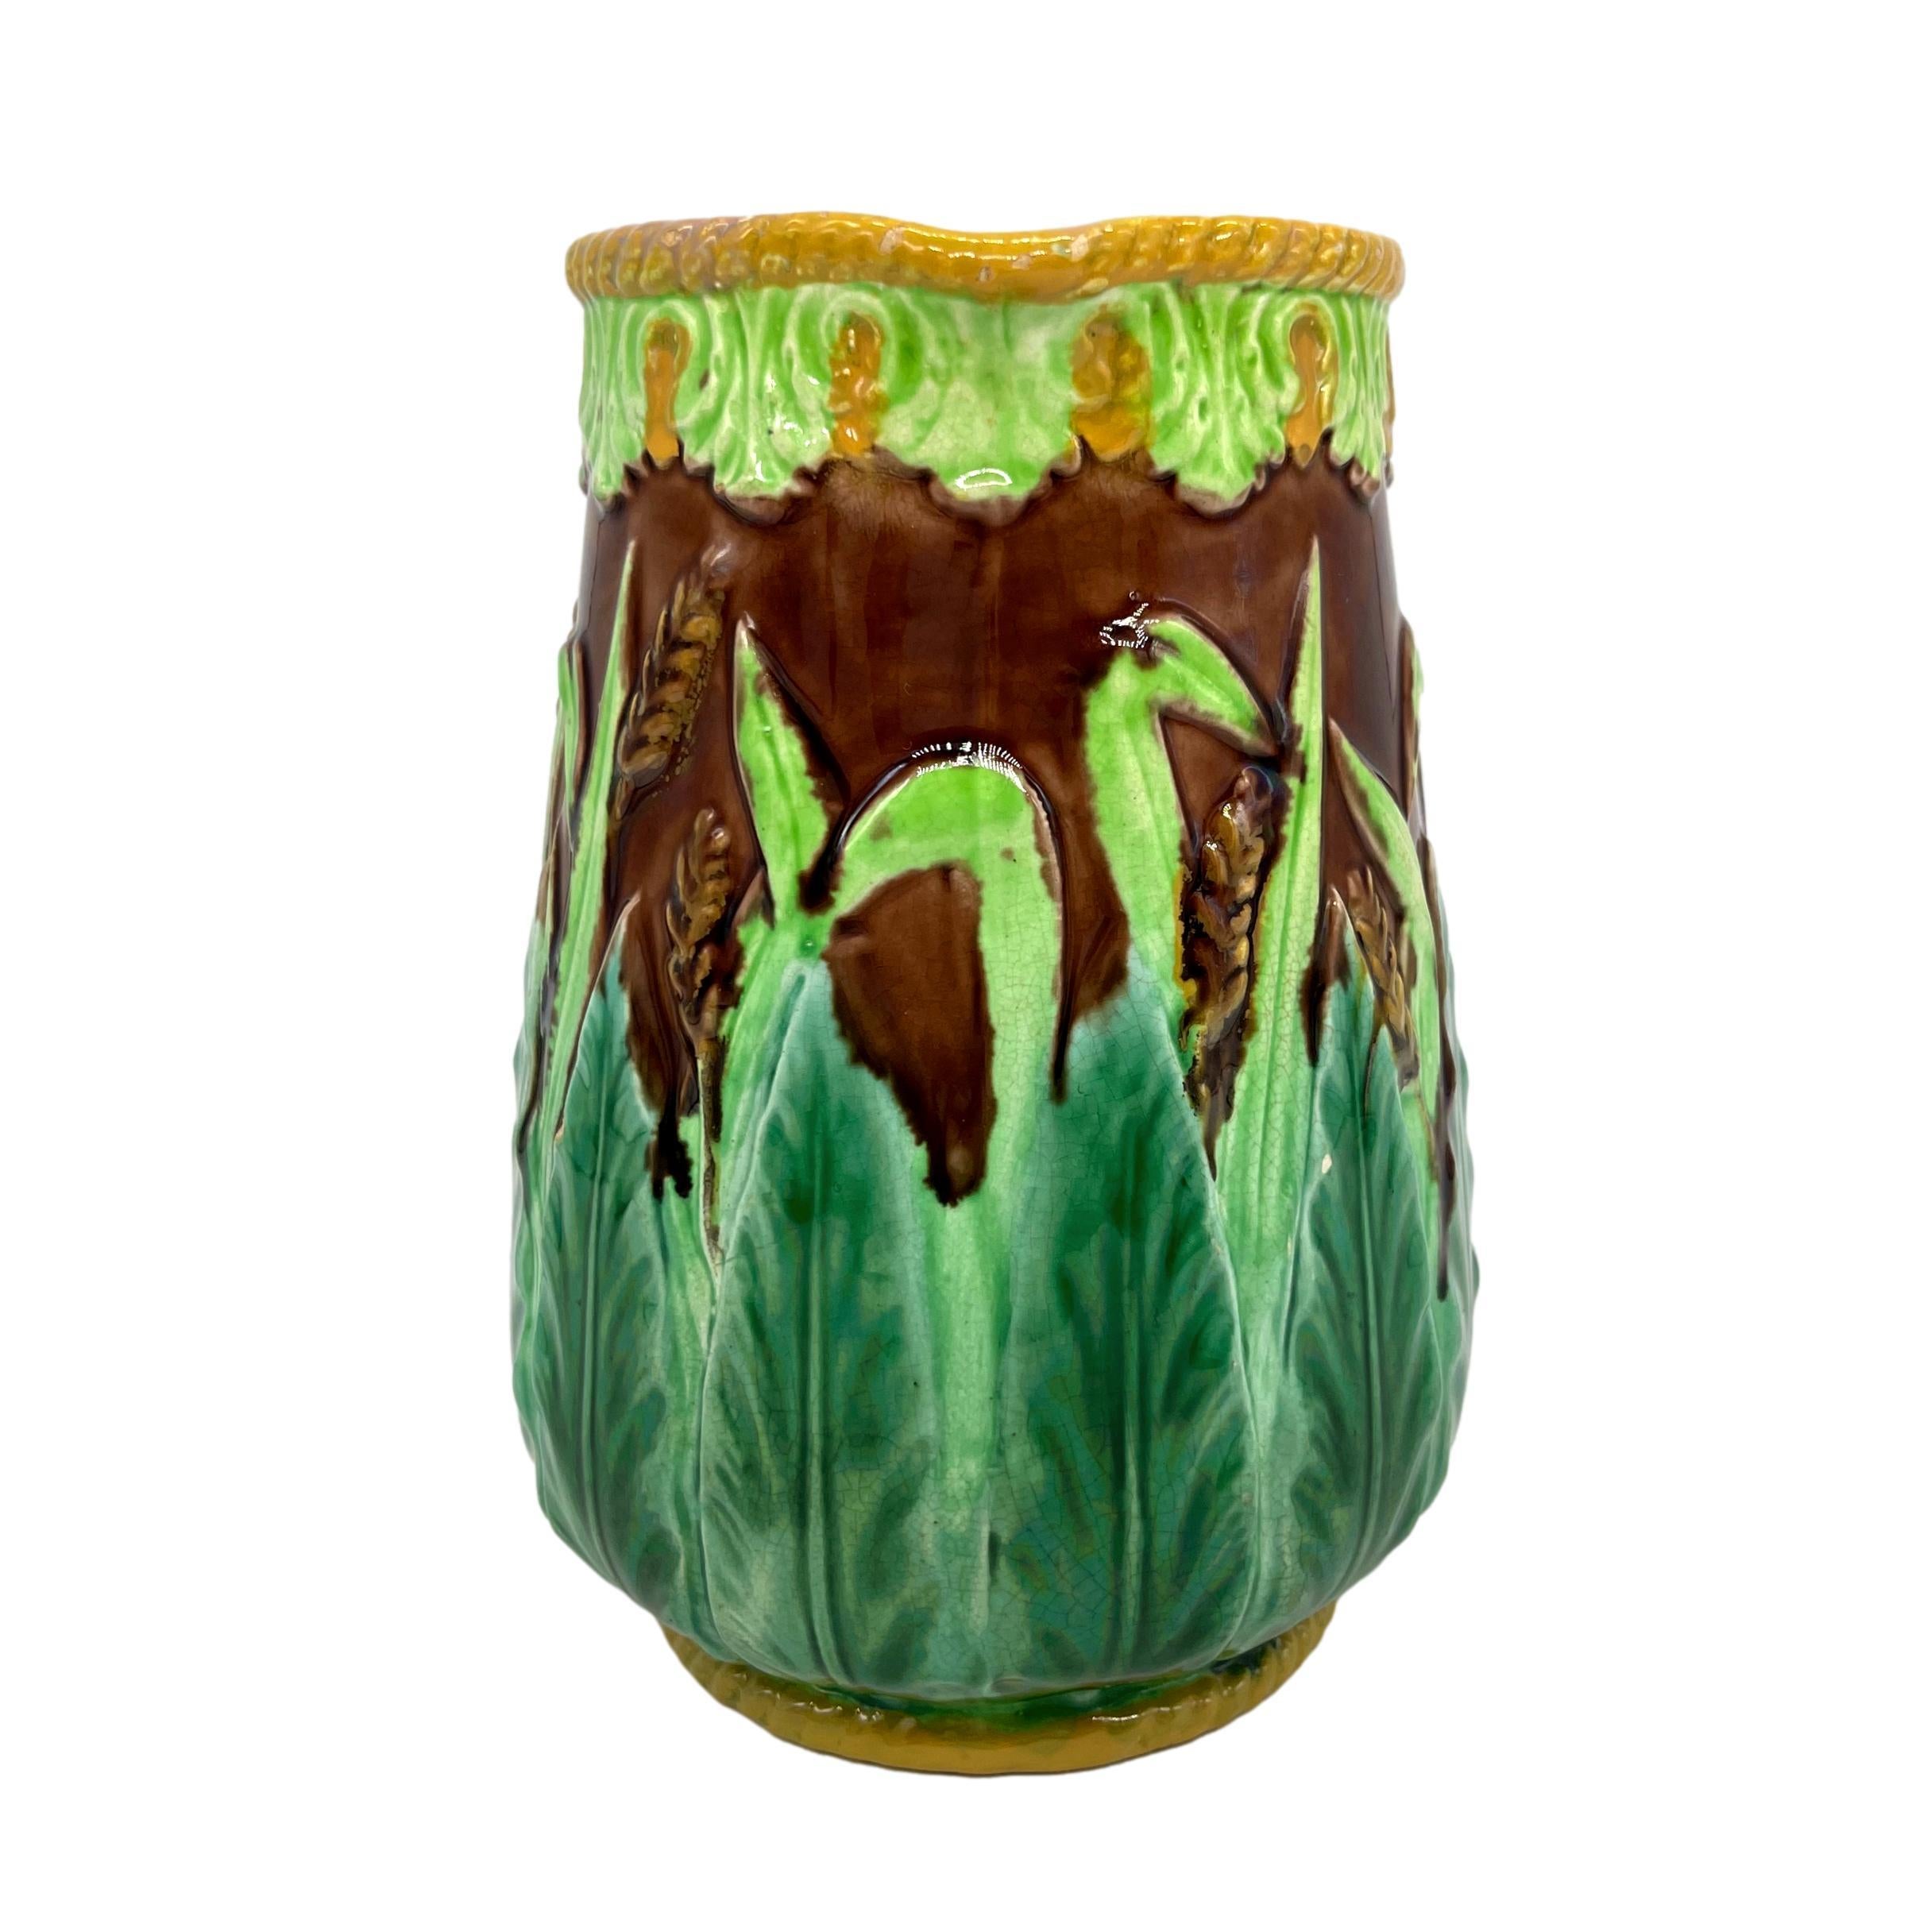 Victorian George Jones Majolica Wheat Pitcher with Green Acanthus Leaves, Ca. 1875 For Sale